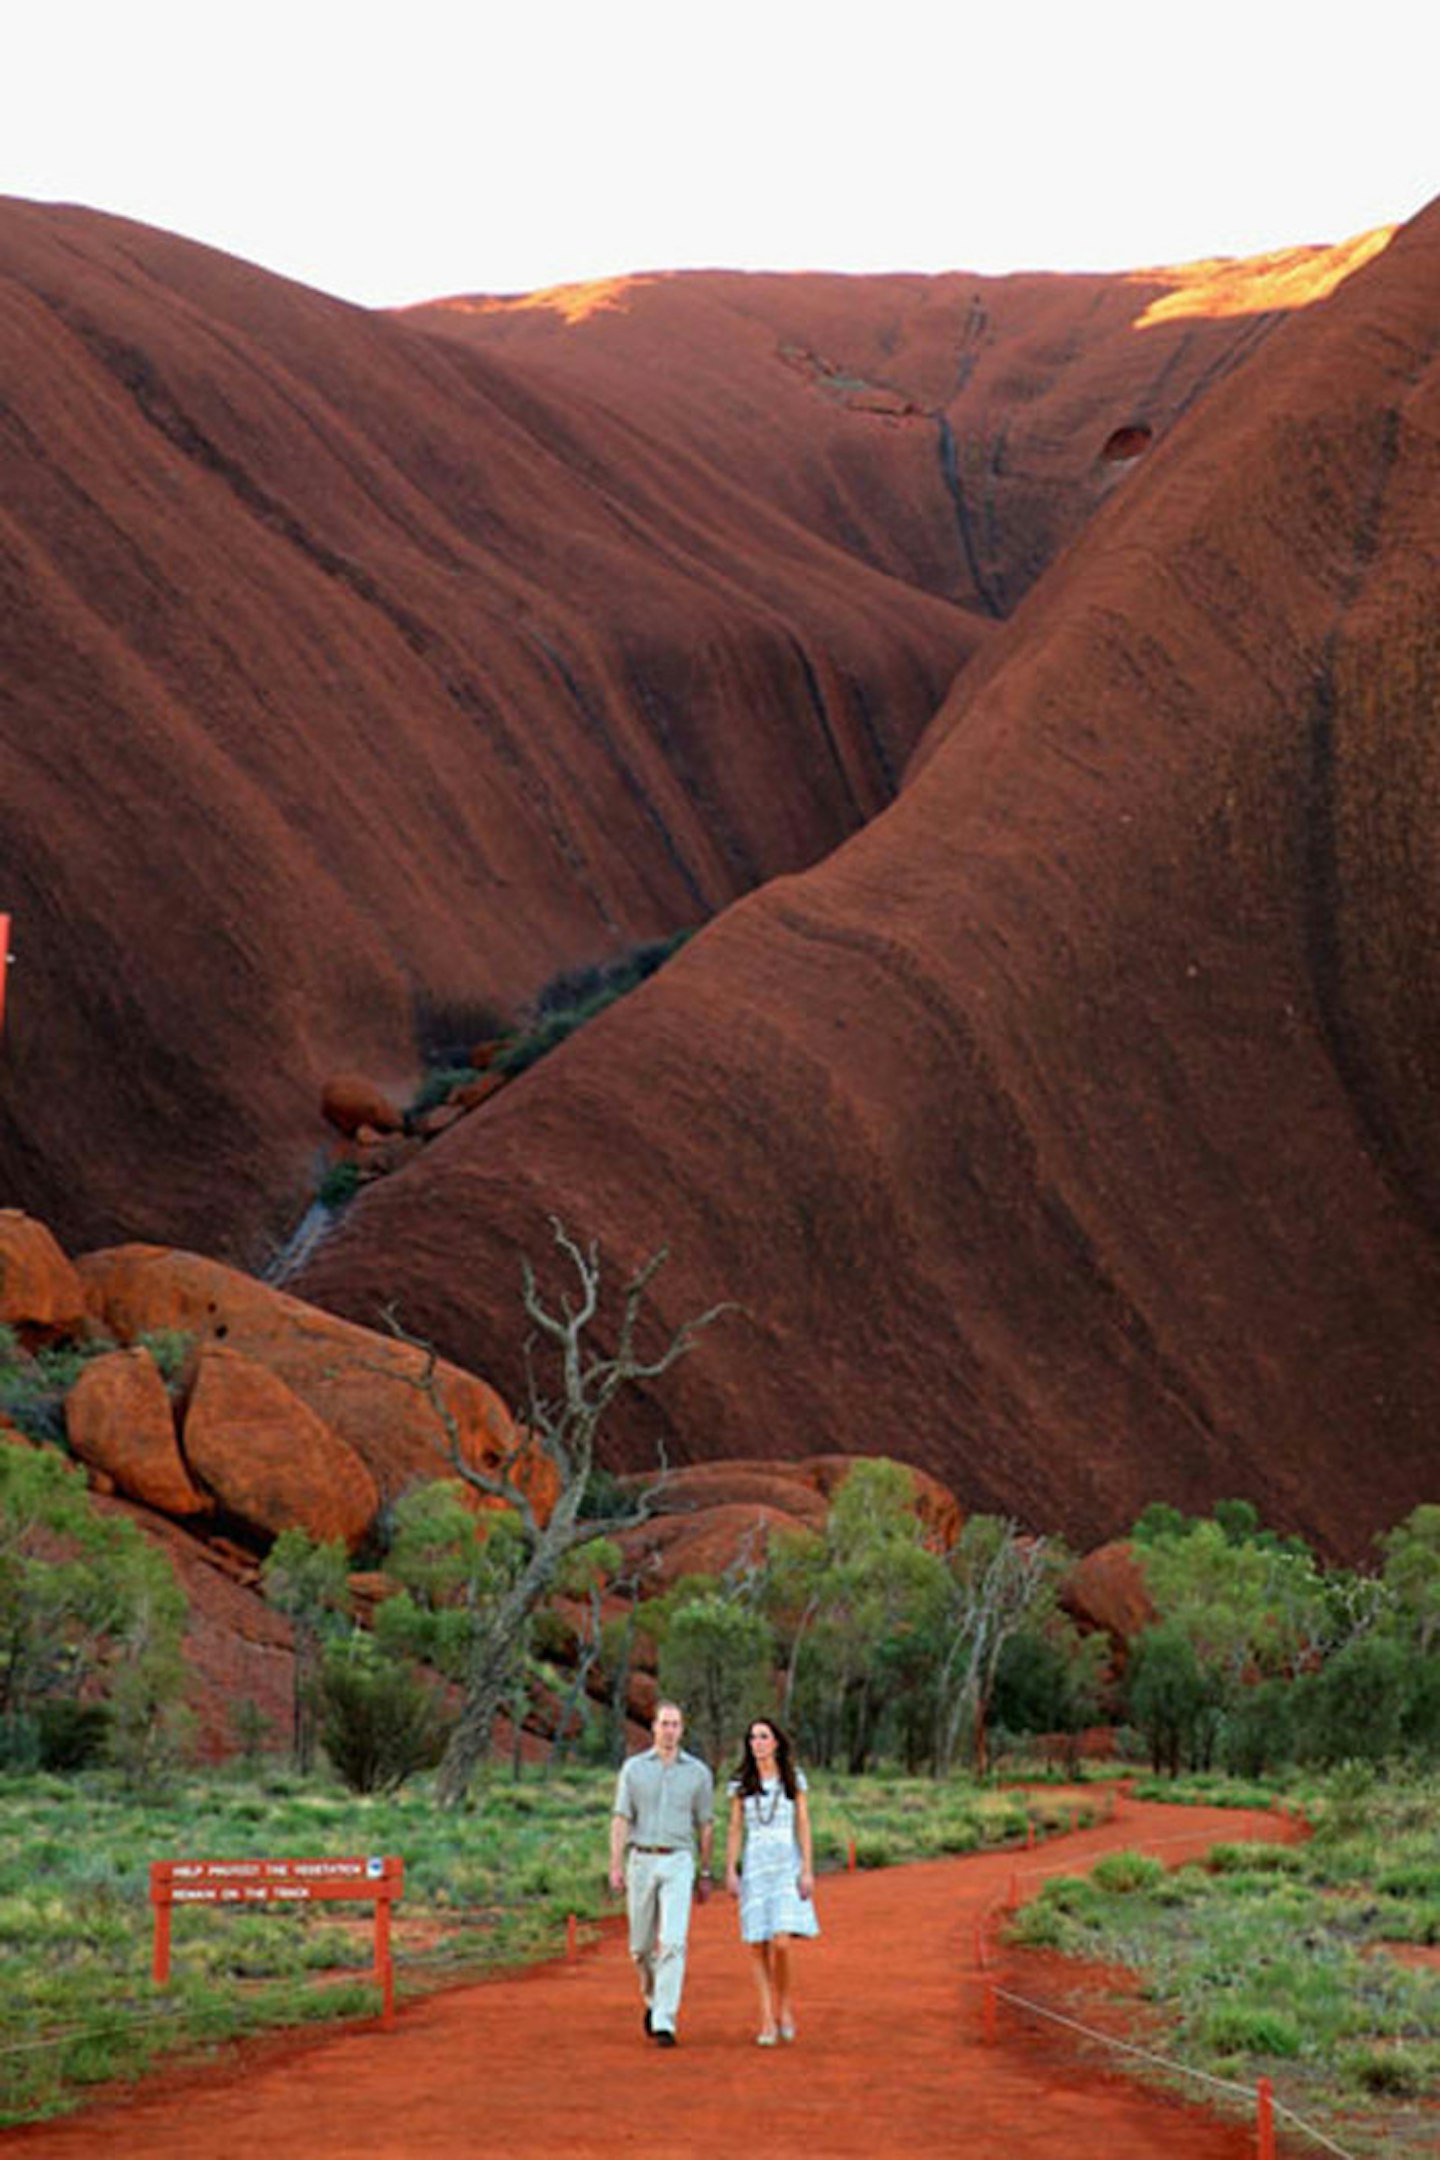 78-77. The couple at a quick photocall at the base of Uluru